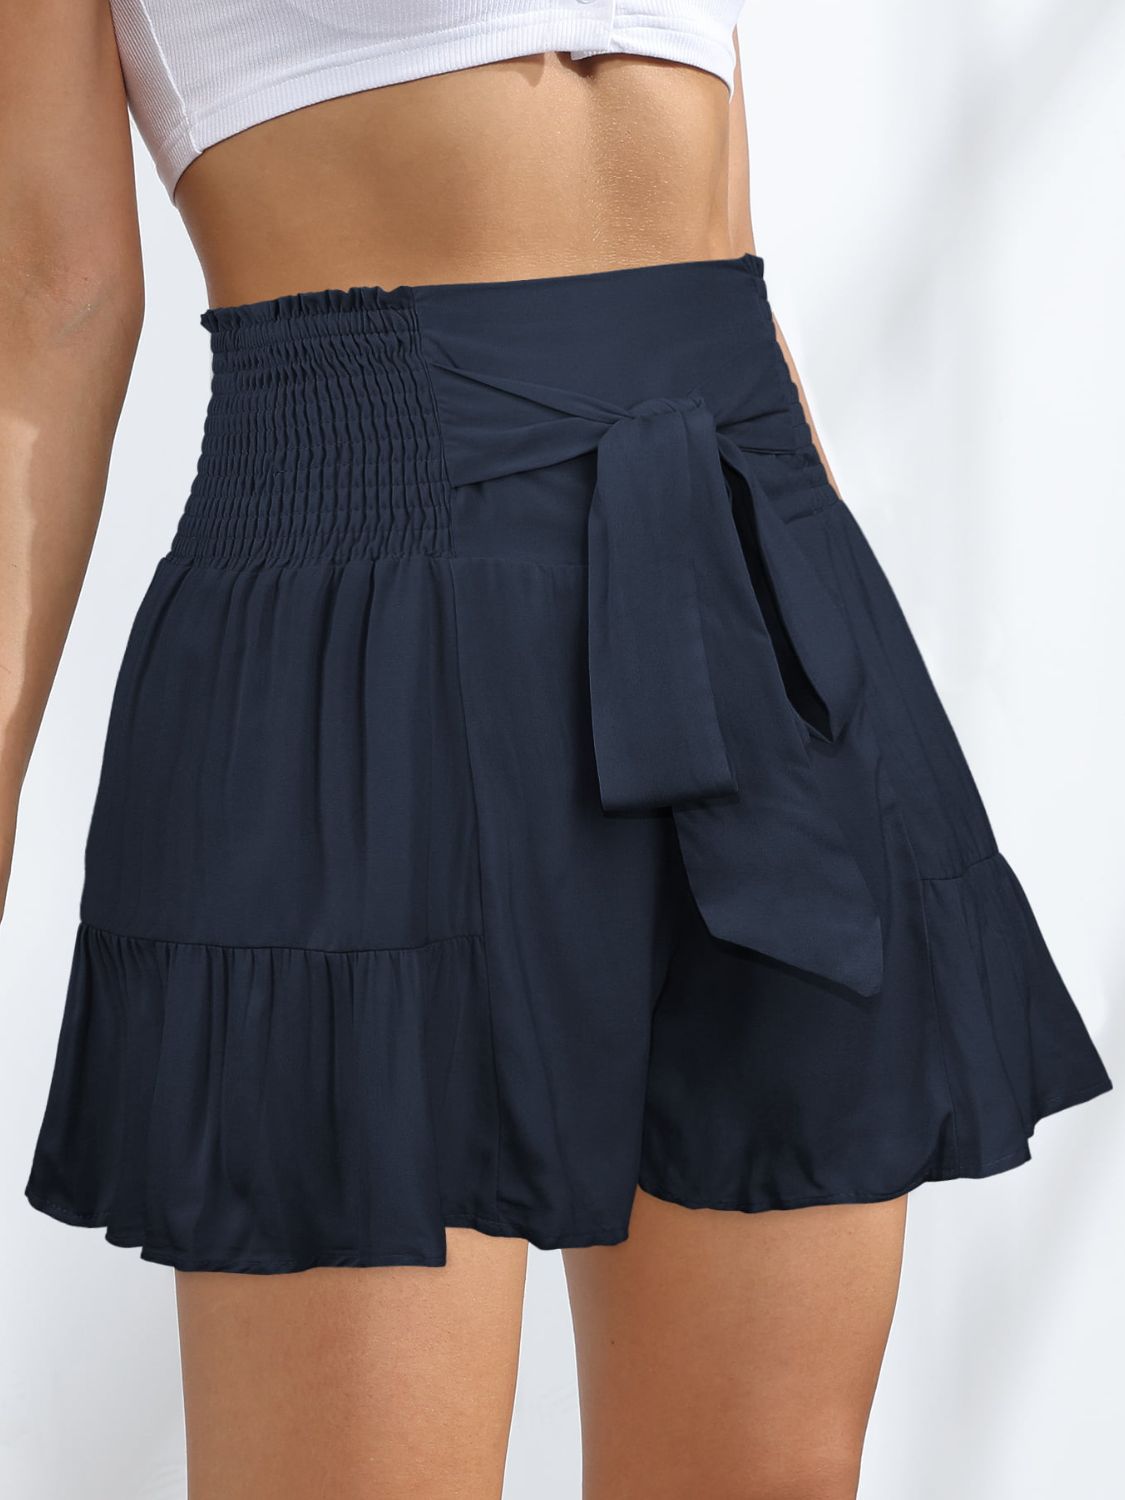 Load image into Gallery viewer, Smocked Tie-Front High-Rise Shorts- ONLINE ONLY 2-10 DAY SHIPPING